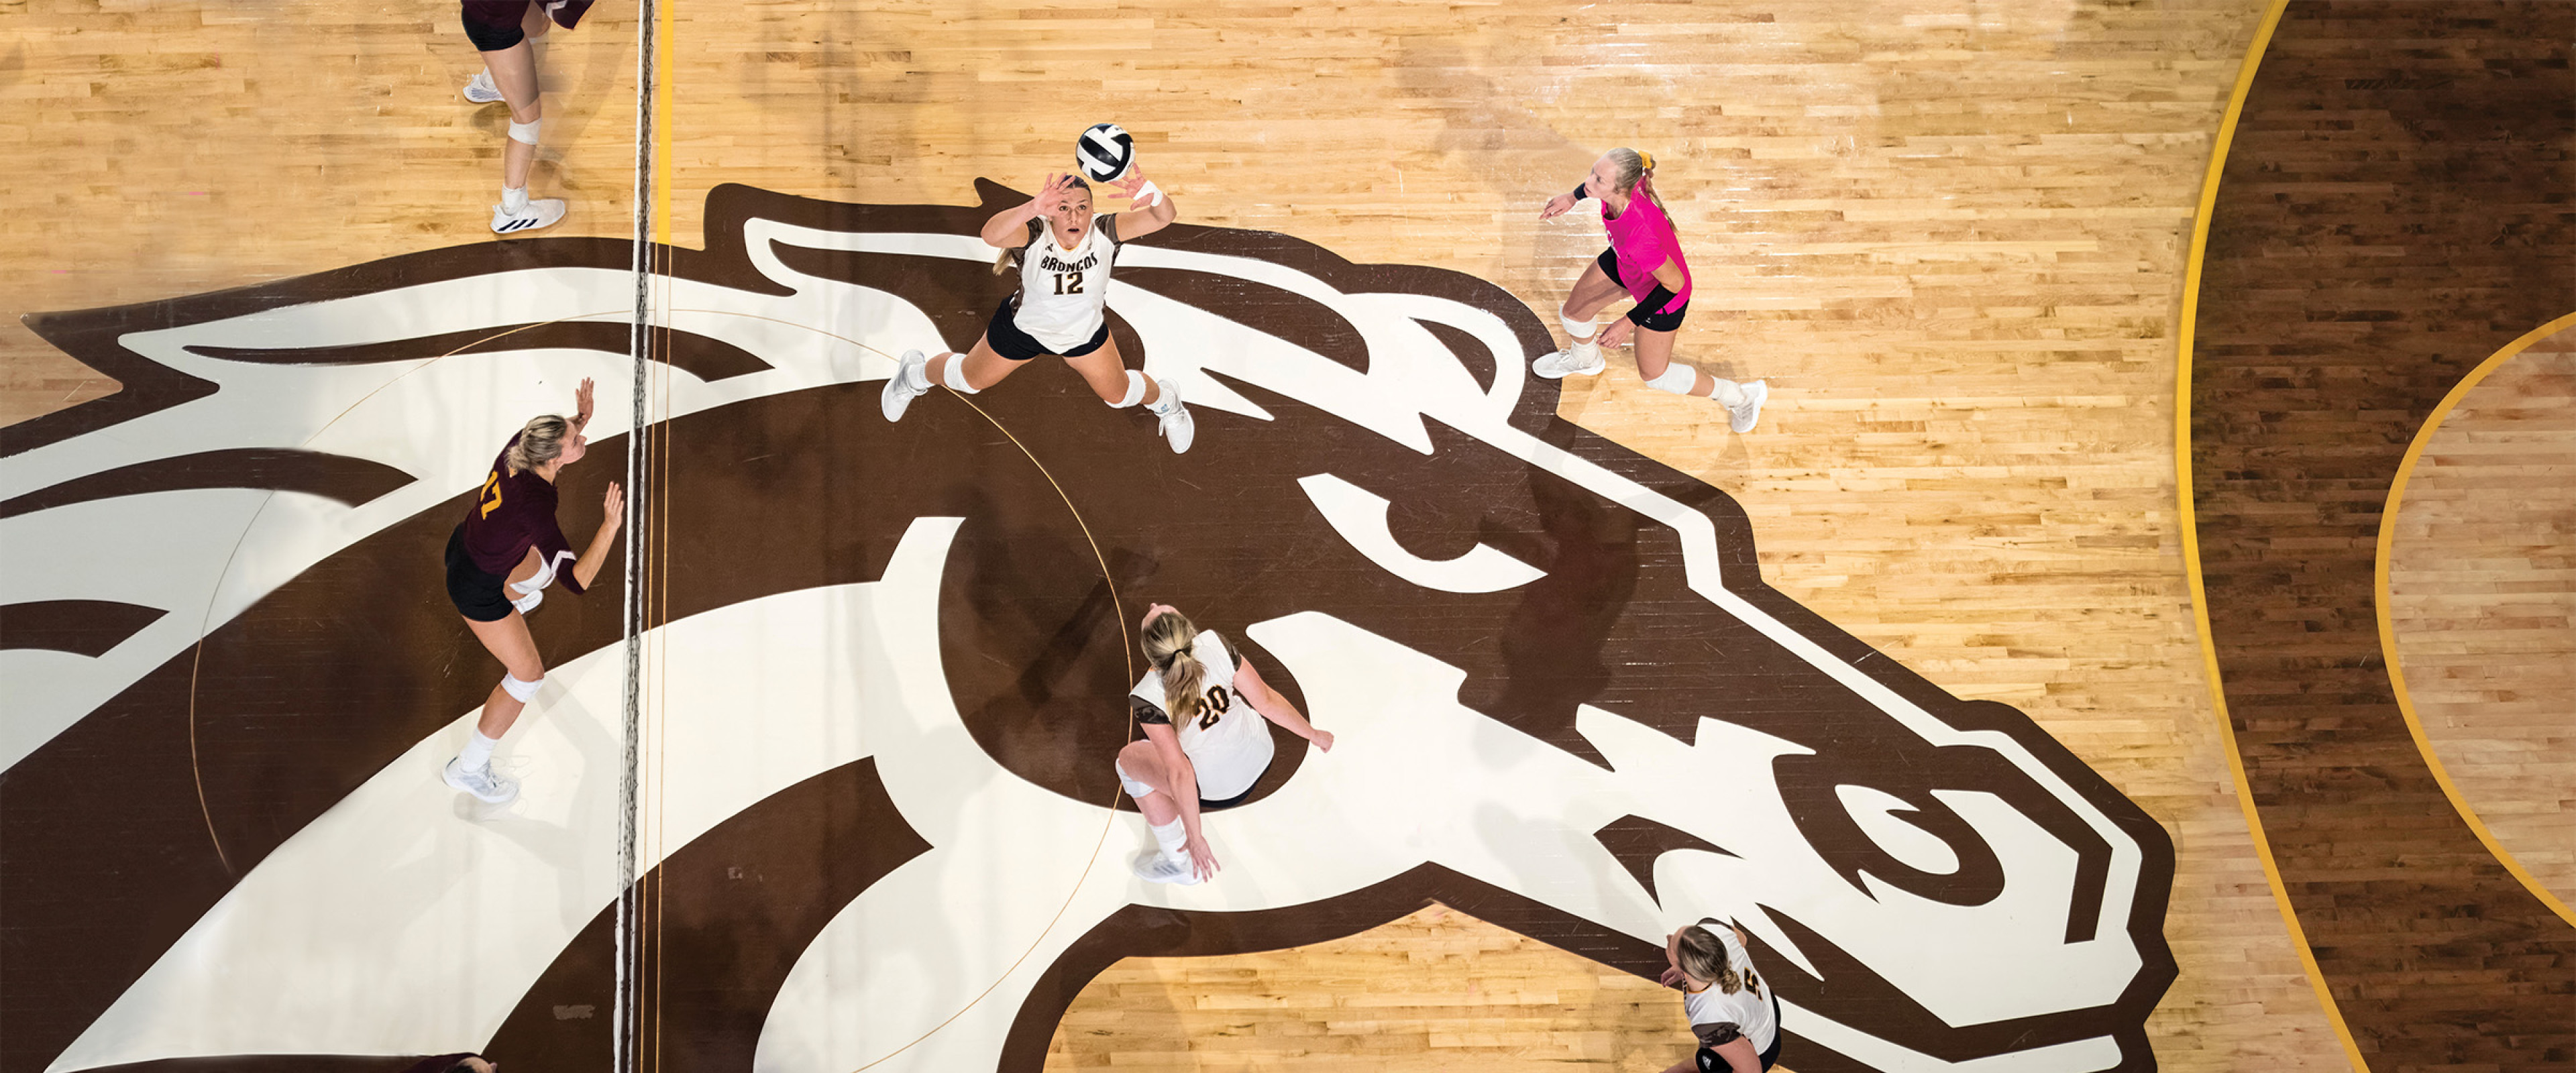 A birds-eye view of volleyball players on a court.